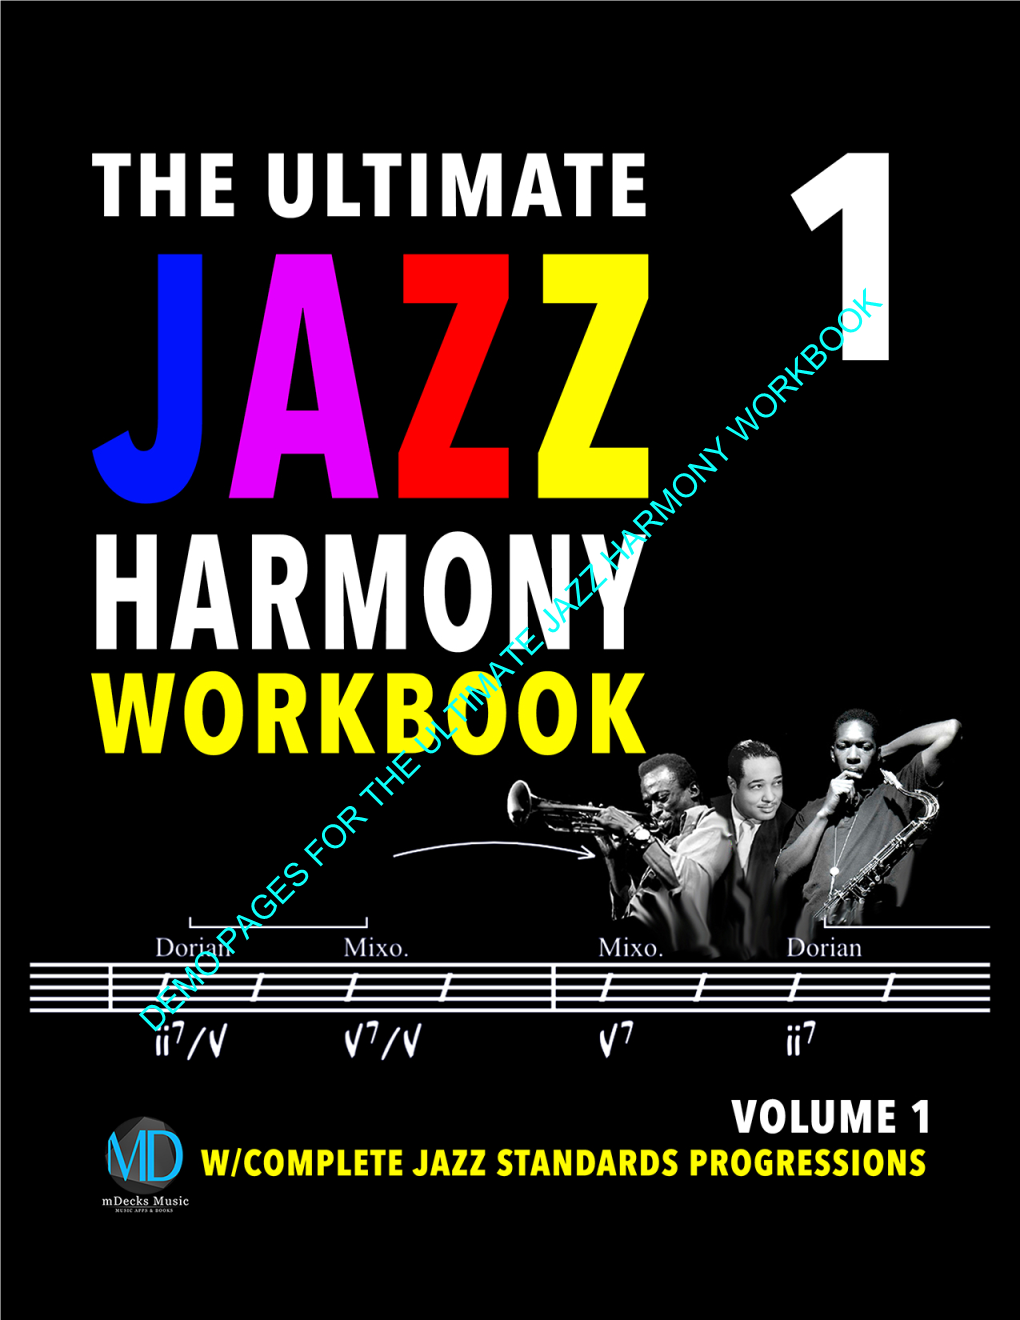 Demo Pages for the Ultimate Jazz Harmony Workbook